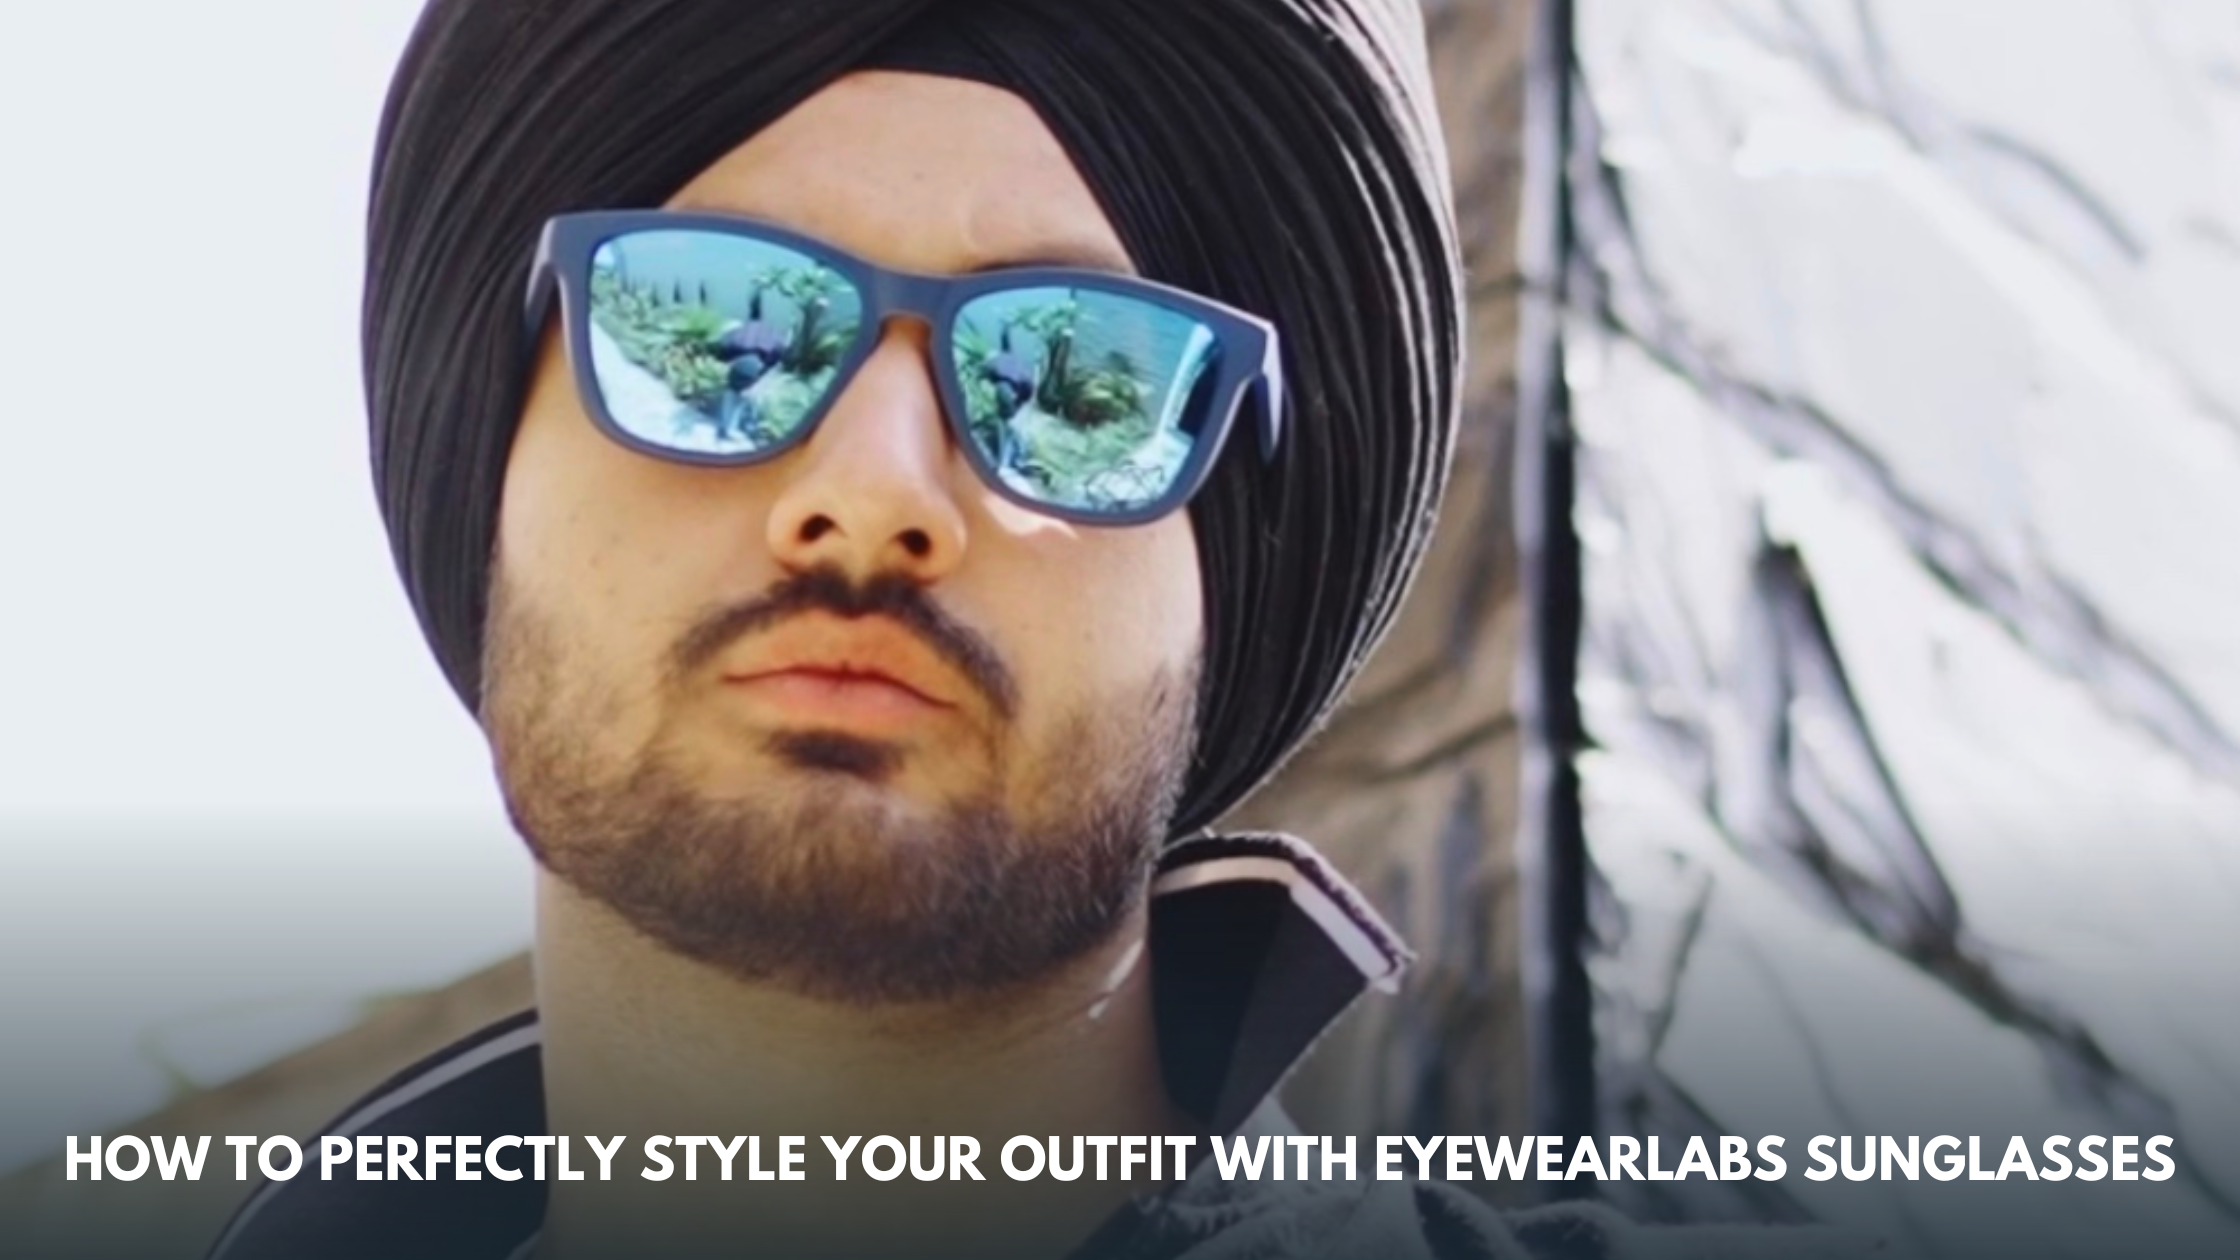 How to Perfectly Style Your Outfit with Eyewearlabs Sunglasses